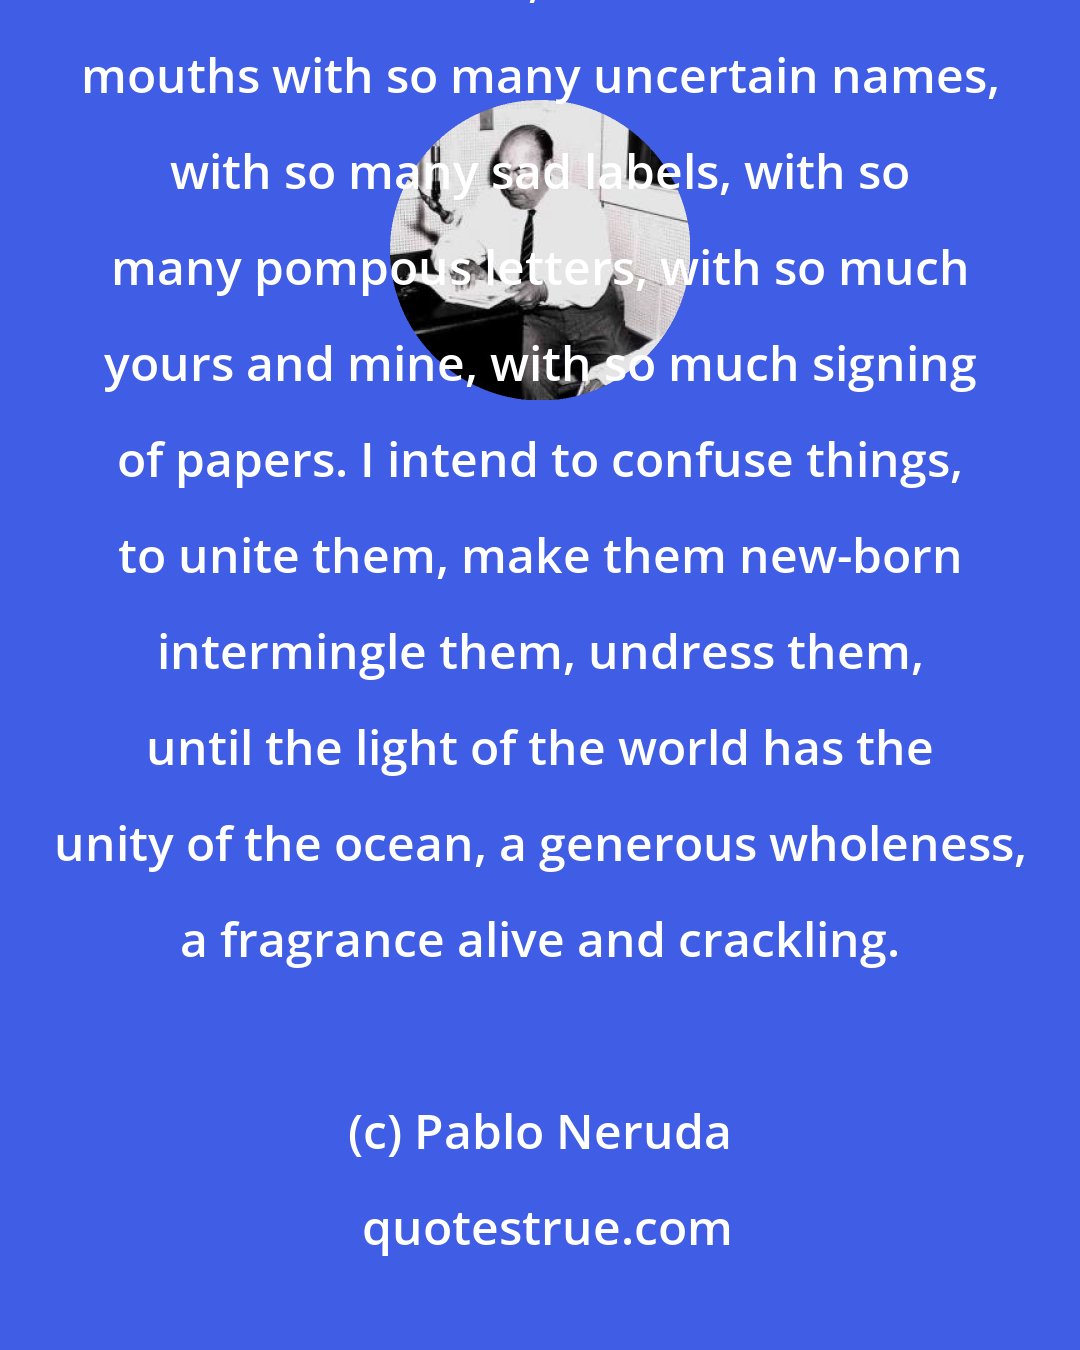 Pablo Neruda: This means that we have barely disembarked into life, that we've only just now been born, let's not fill our mouths with so many uncertain names, with so many sad labels, with so many pompous letters, with so much yours and mine, with so much signing of papers. I intend to confuse things, to unite them, make them new-born intermingle them, undress them, until the light of the world has the unity of the ocean, a generous wholeness, a fragrance alive and crackling.